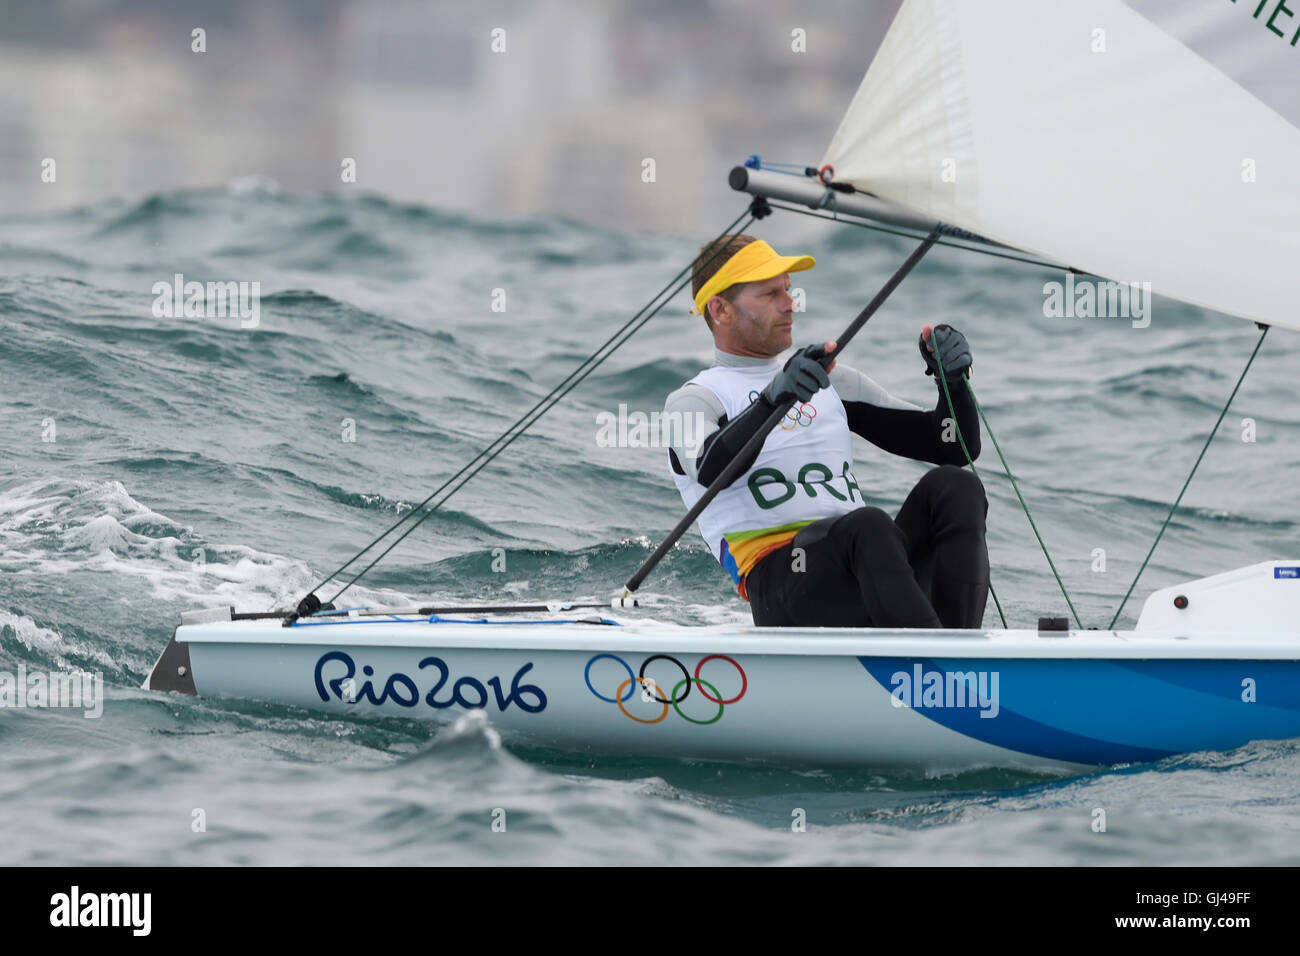 Rio de Janeiro, Brazil. 12th August, 2016. Robert SCHEIDT (BRA) in the men&#39aser catecategory during the candle Rio Olympics 2016 held at Marina da Glória, in Guanabara BayT AVAILABLE BLE FOR LICENSING IN CHINA (Photo: Celso Pupo/Fotoarena) Stock Photo